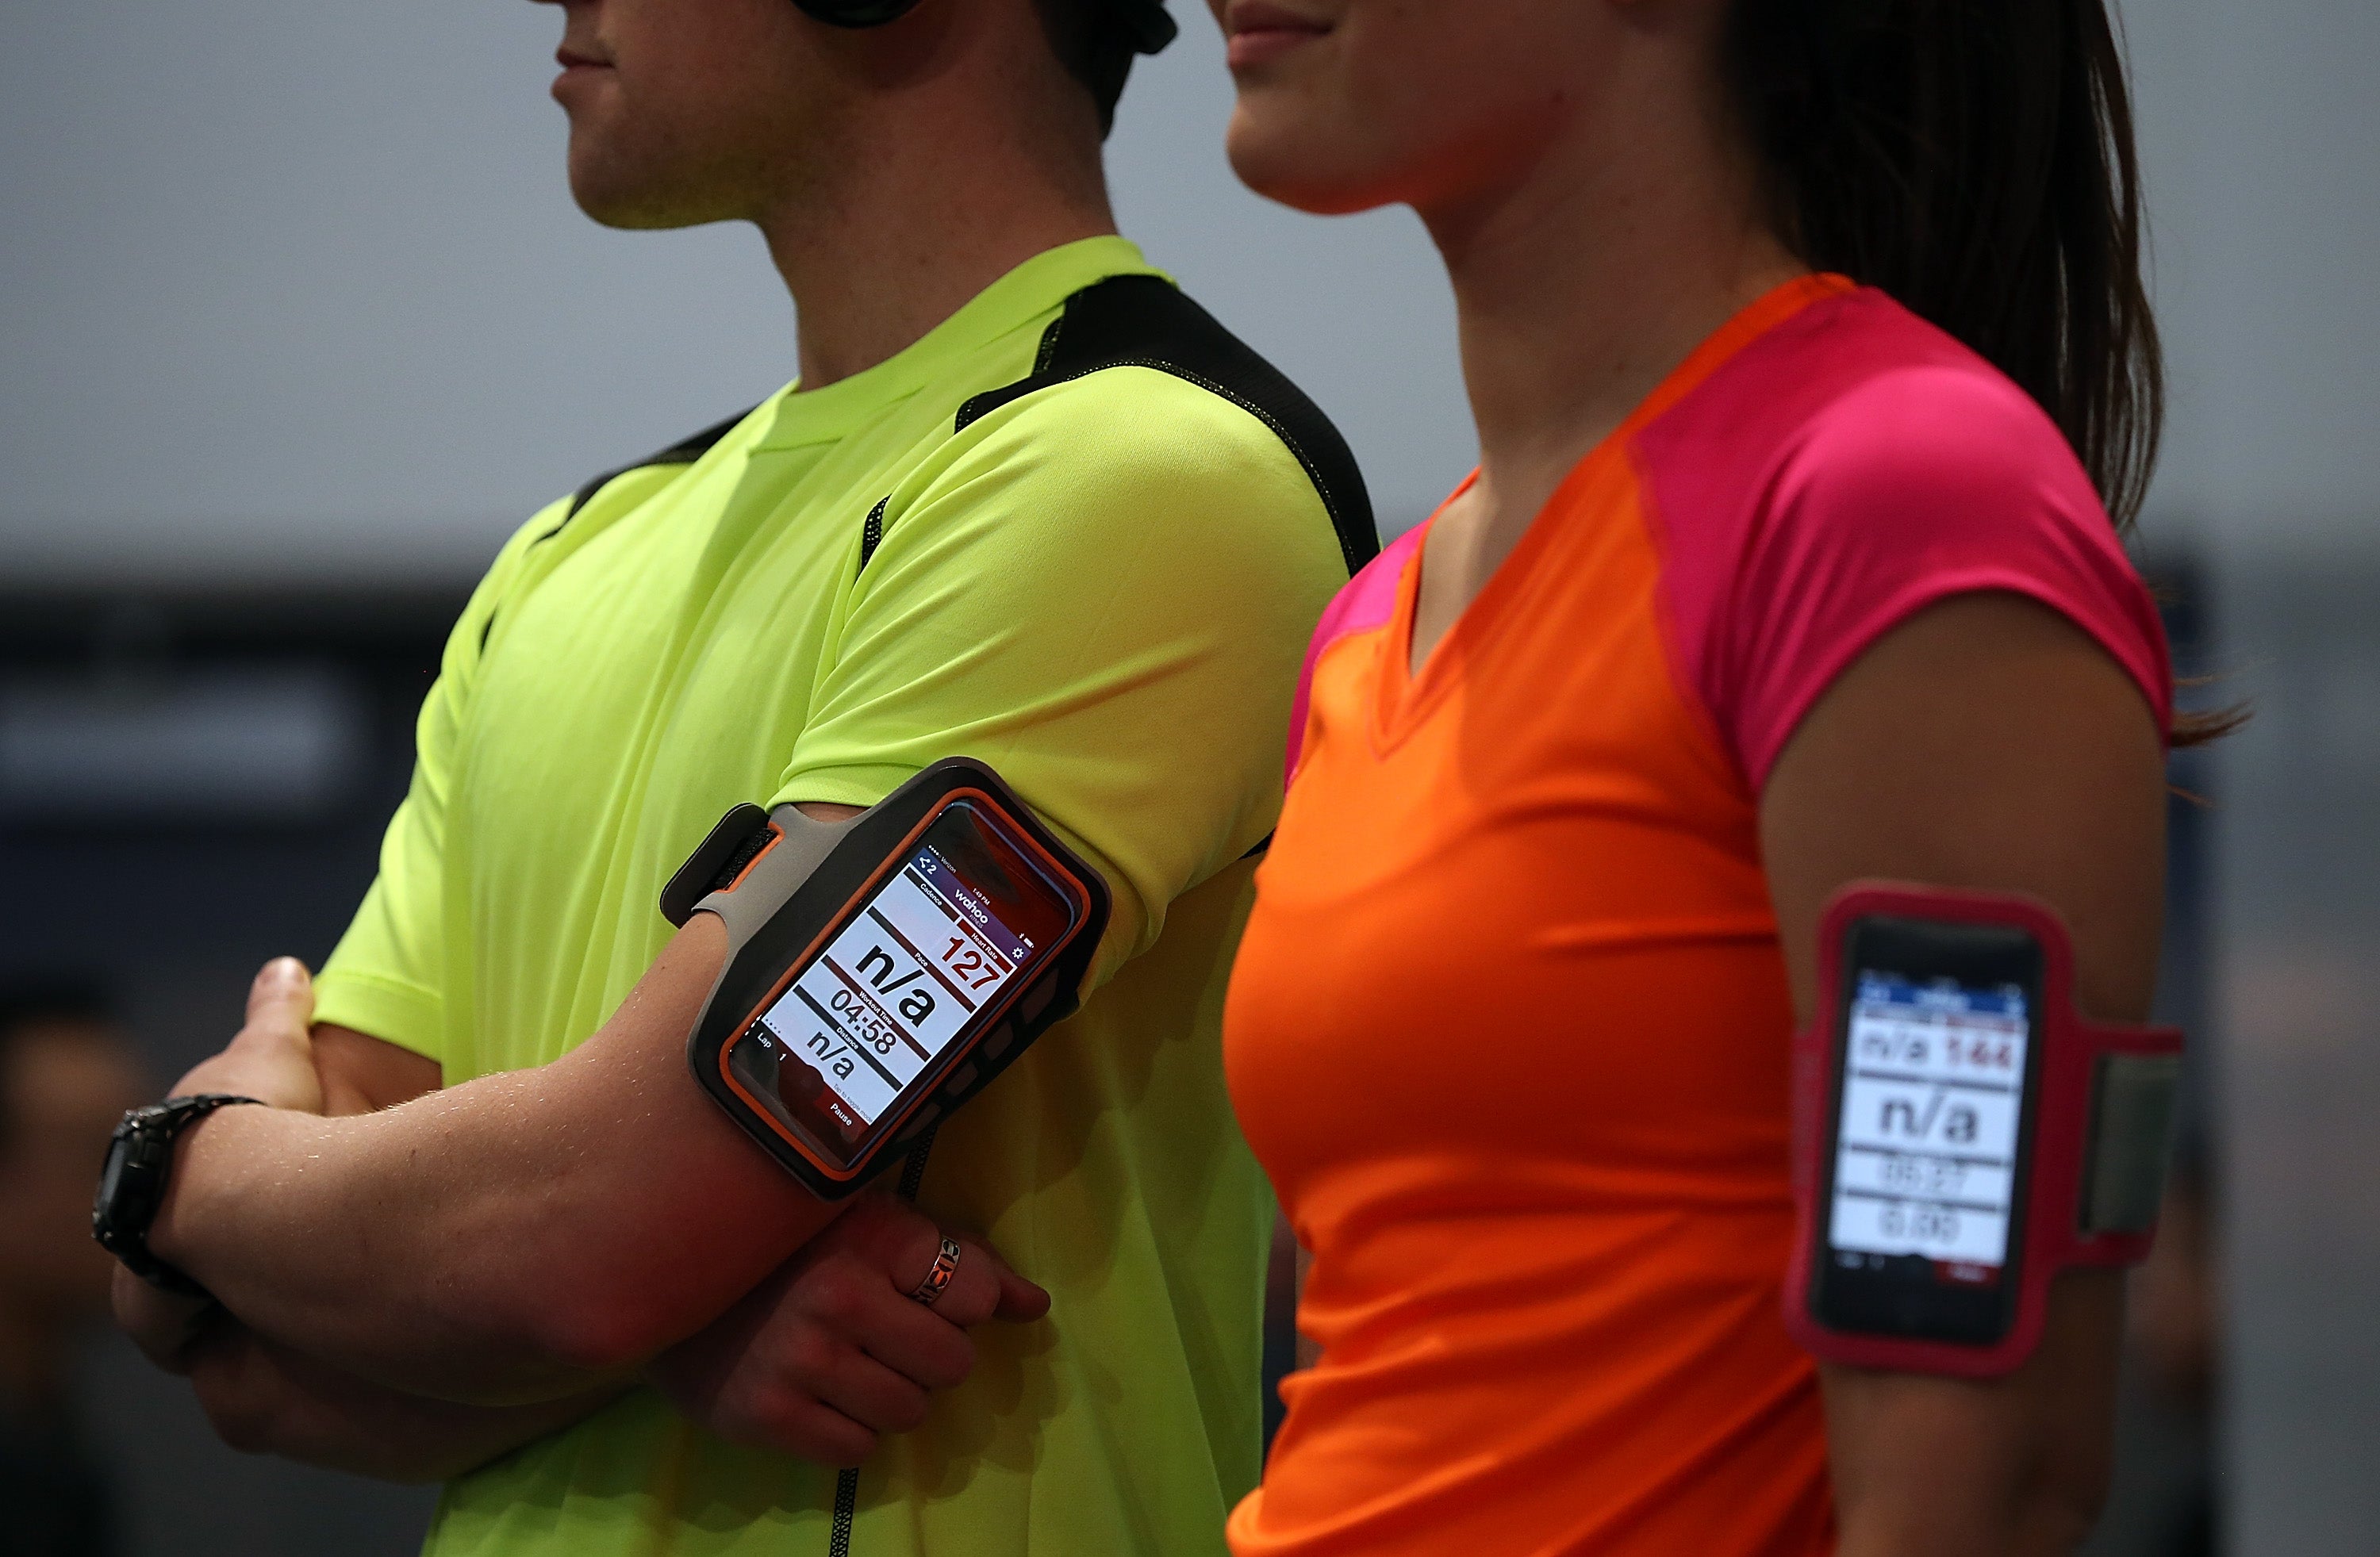 Smartphones that collect fitness data are already widely available